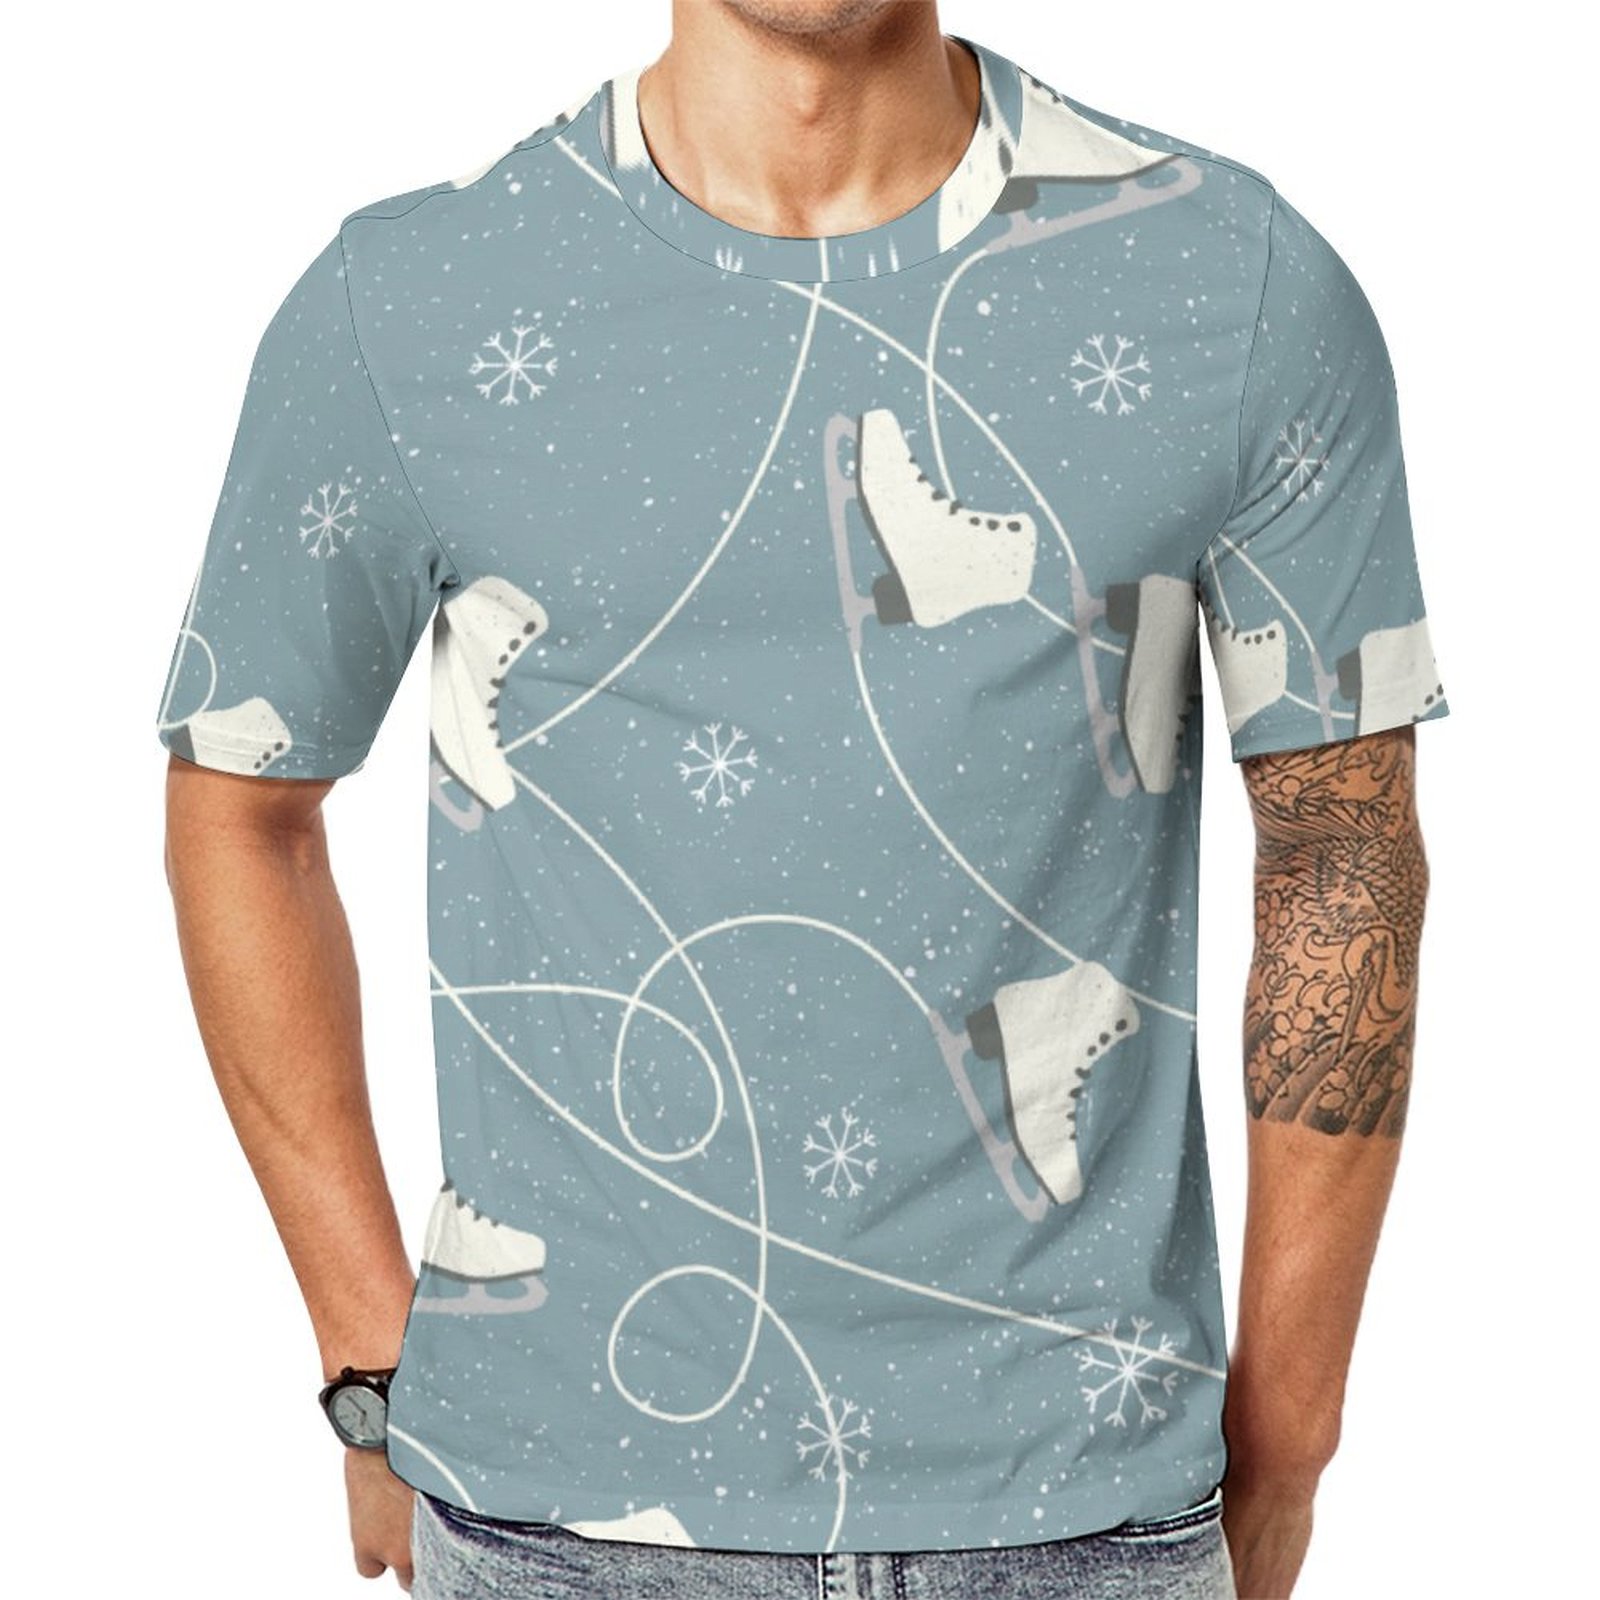 Ice Skate And Snowflake Short Sleeve Print Unisex Tshirt Summer Casual Tees for Men and Women Coolcoshirts